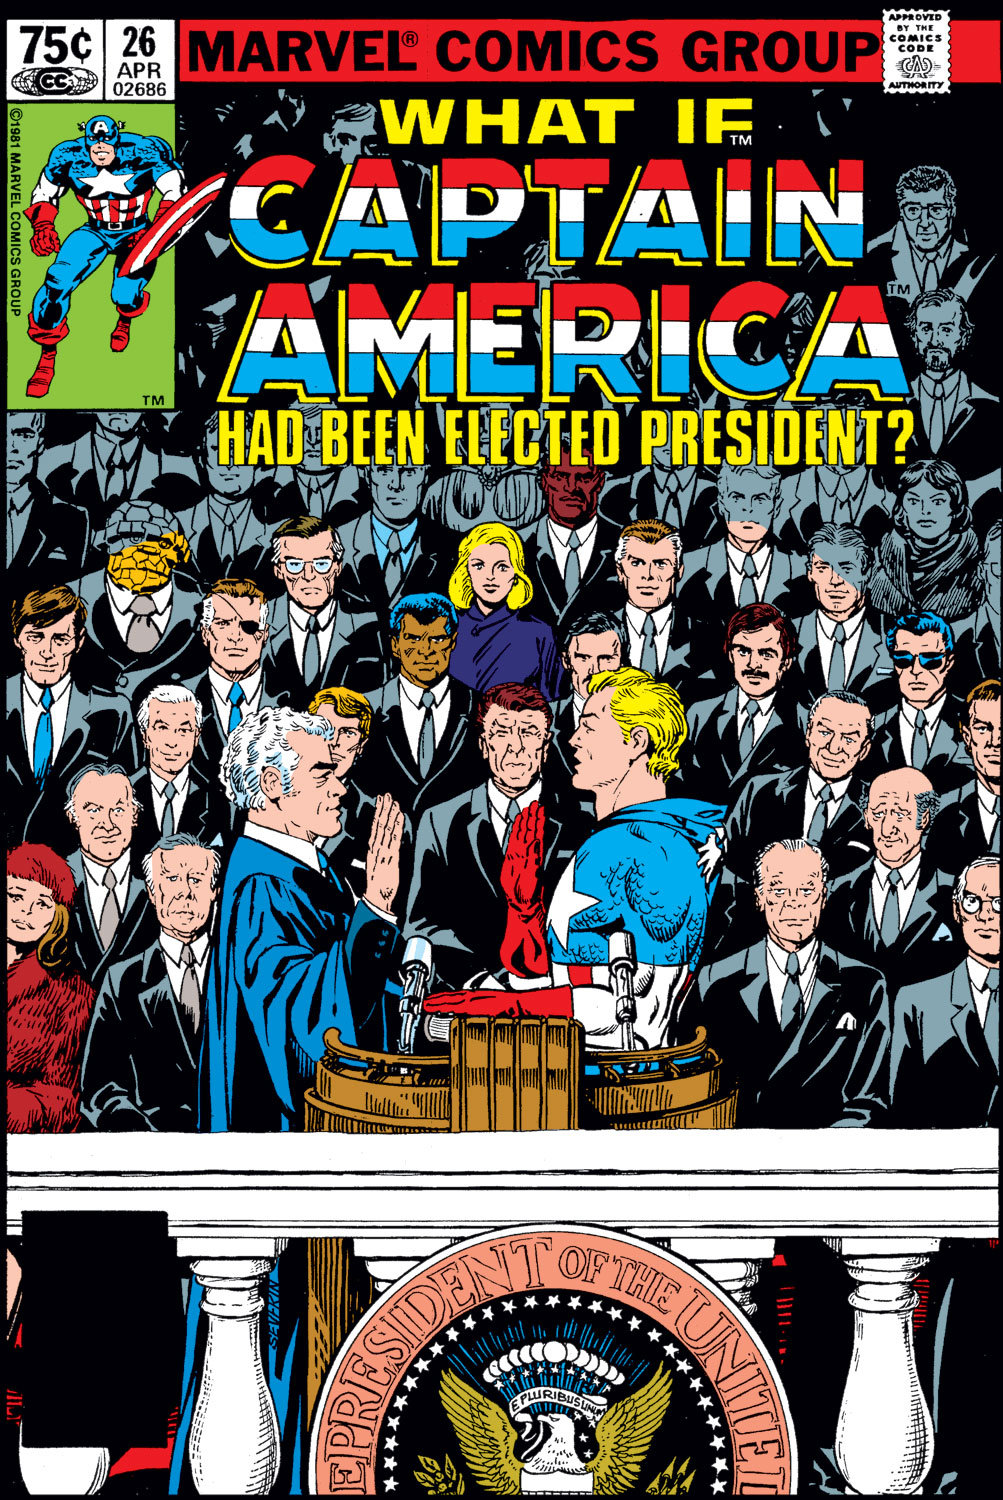 What If? (1977) issue 26 - Captain America had been elected president - Page 1